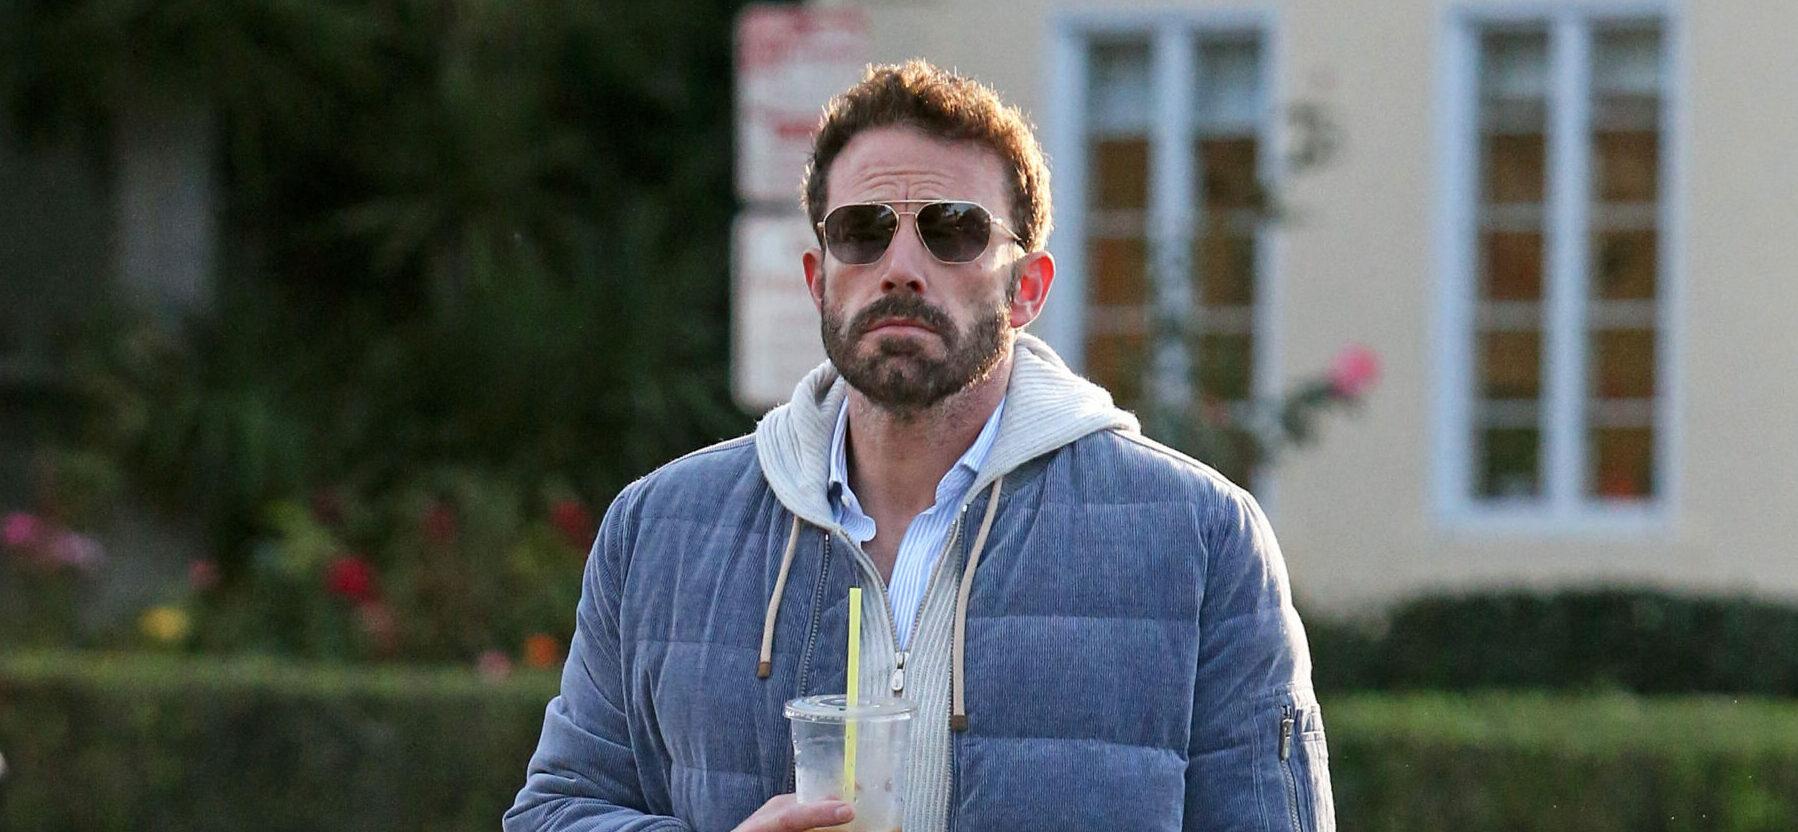 Ben Affleck enjoys a early morning ice coffee while out for a walk in Los Angeles